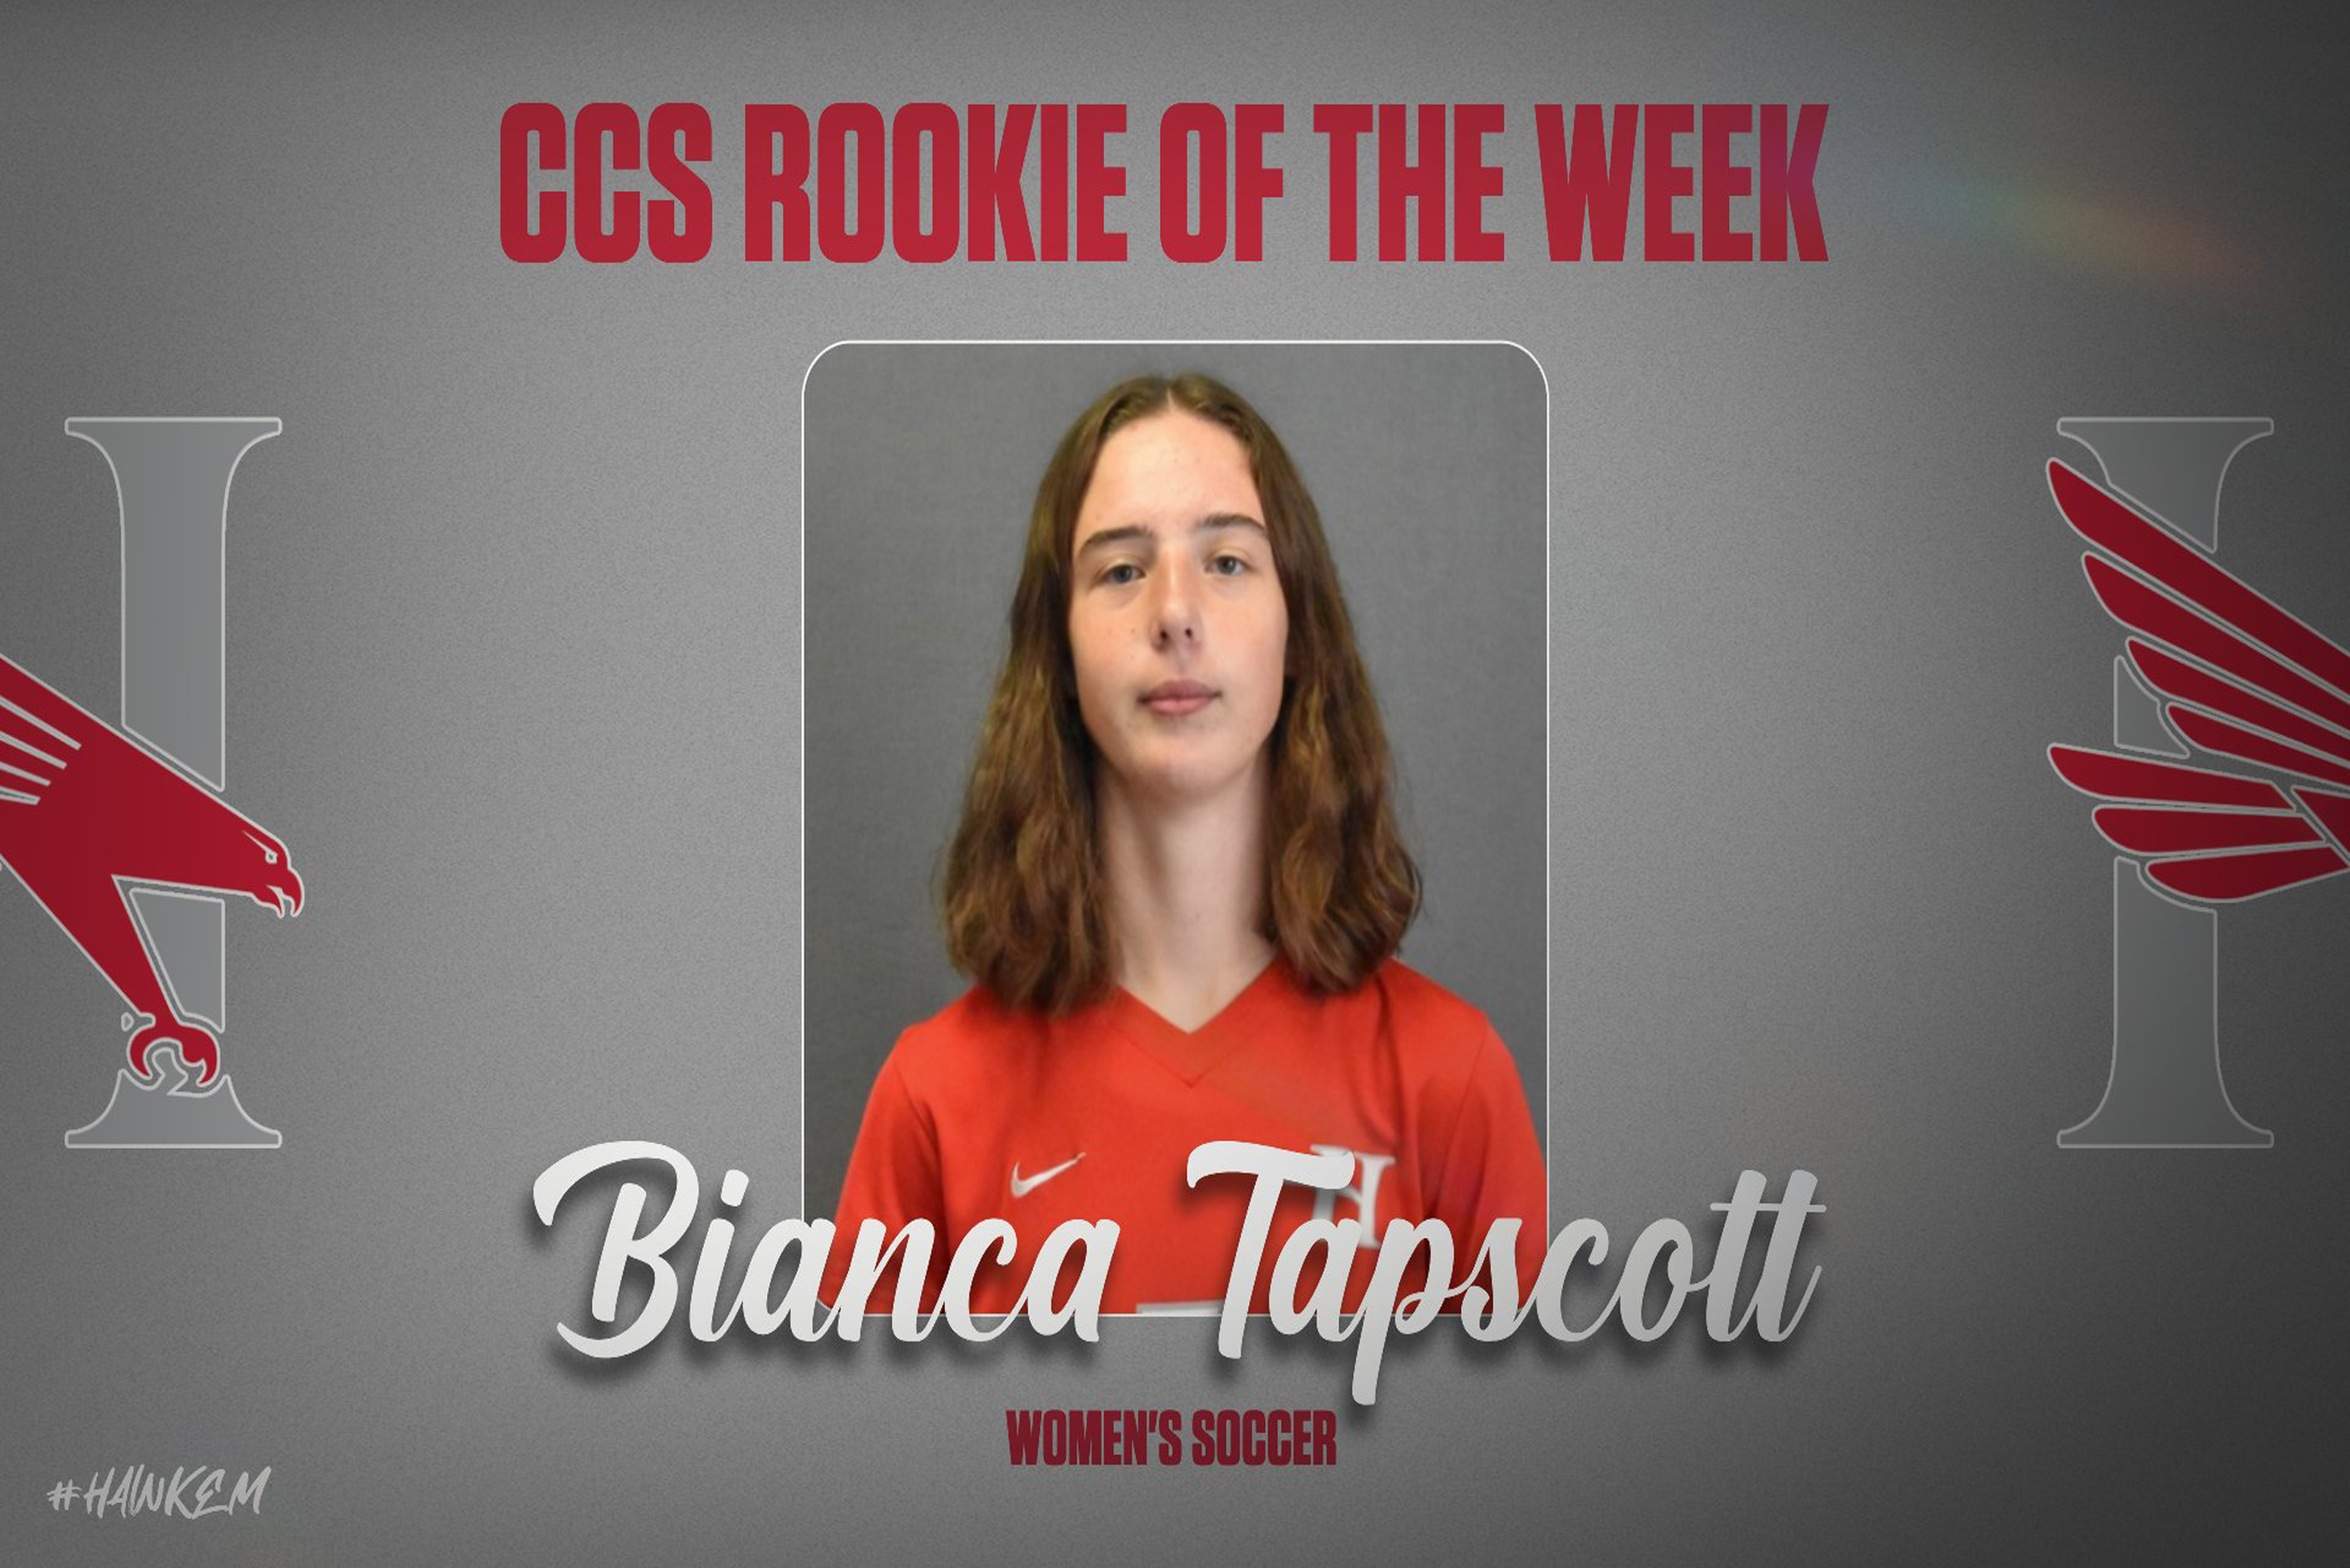 Tapscott Named CCS Rookie of the Week